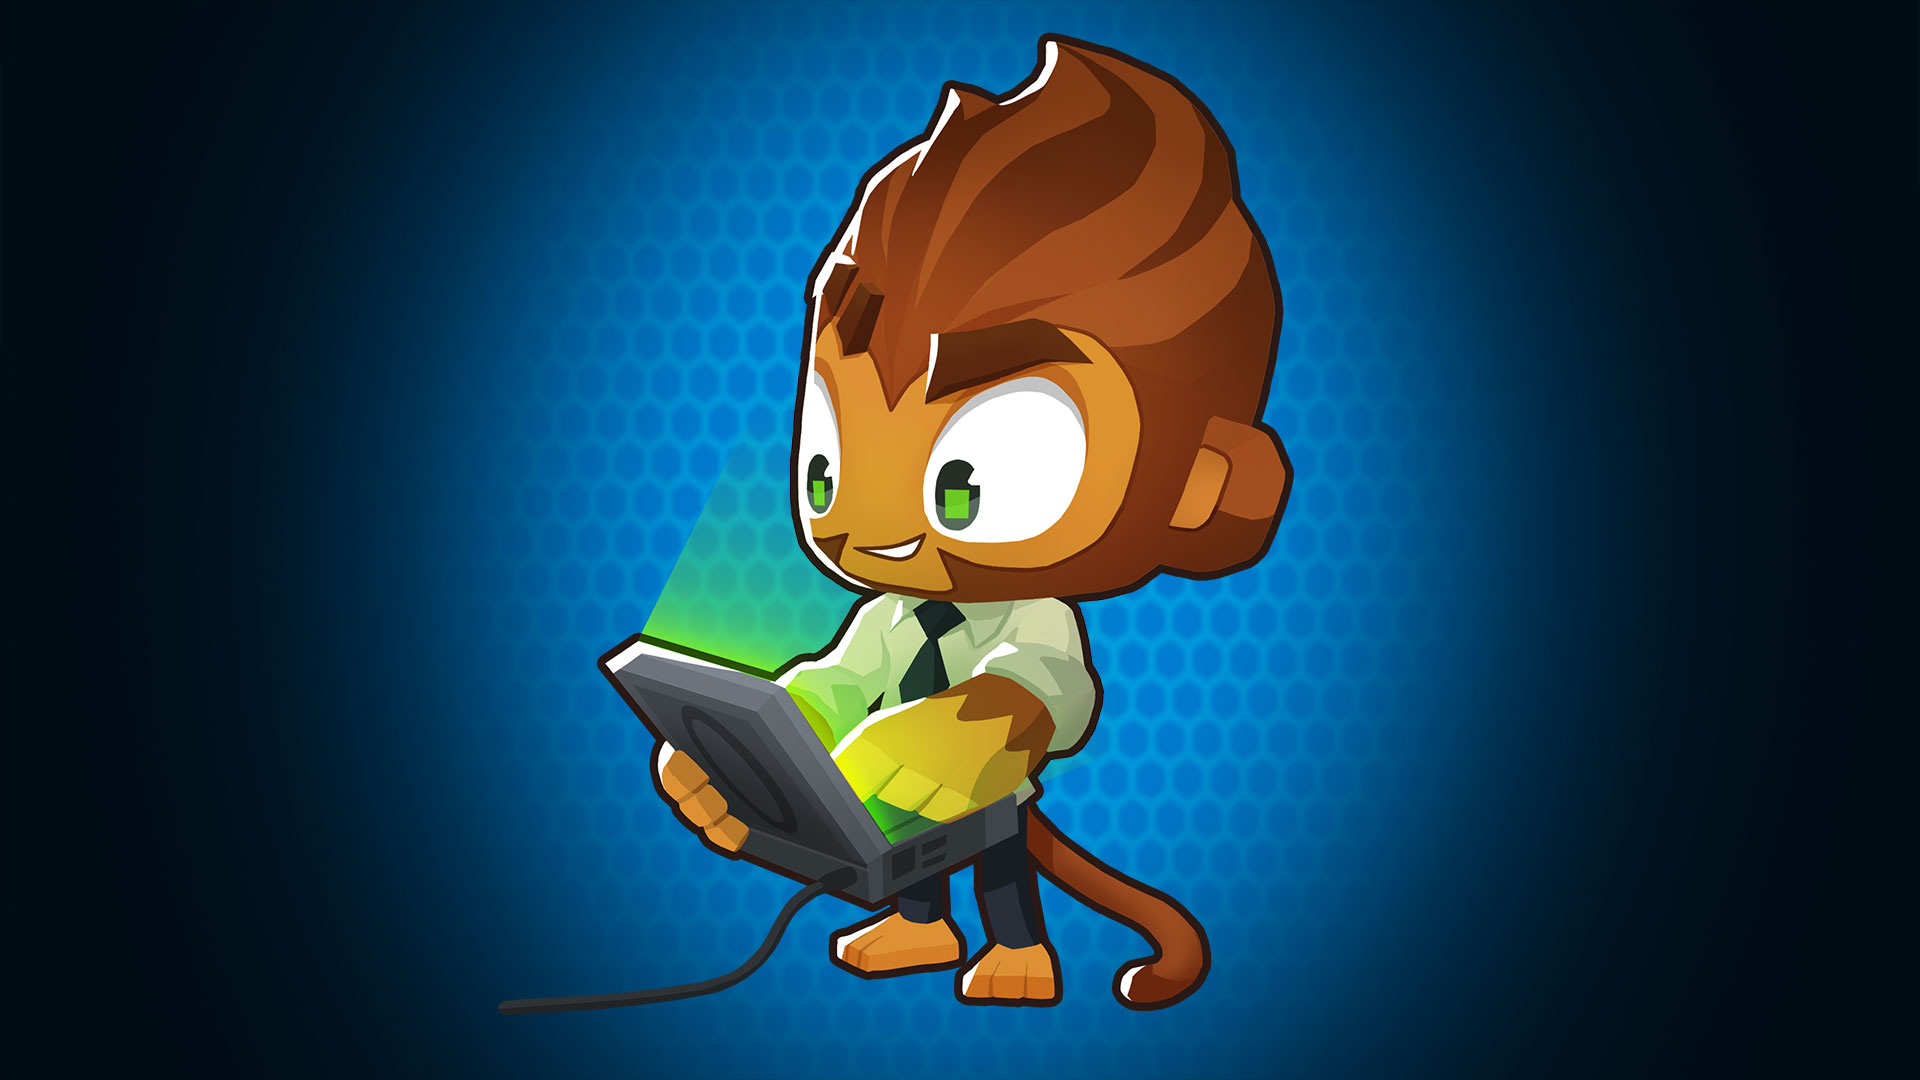 Bloons TD 6 HD wallpaper featuring a cartoon monkey strategist engrossed in a digital tablet against a blue background.